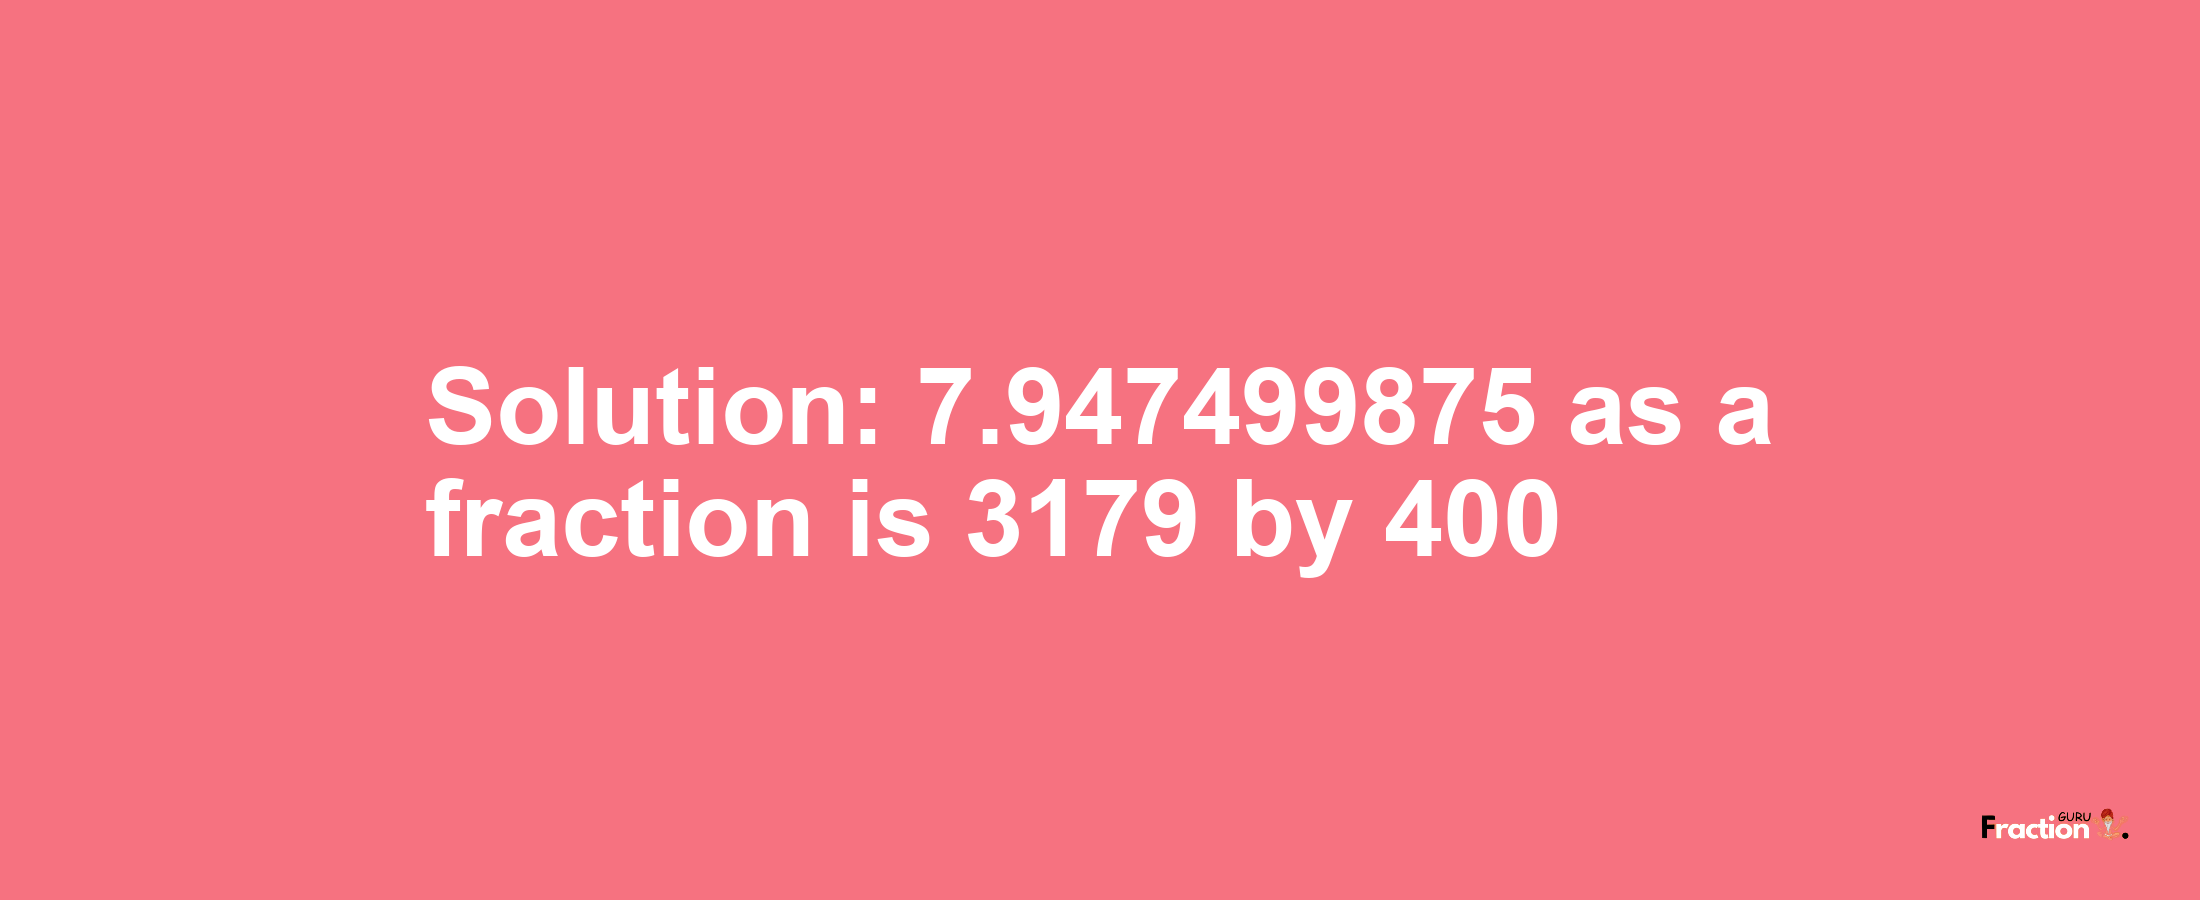 Solution:7.947499875 as a fraction is 3179/400